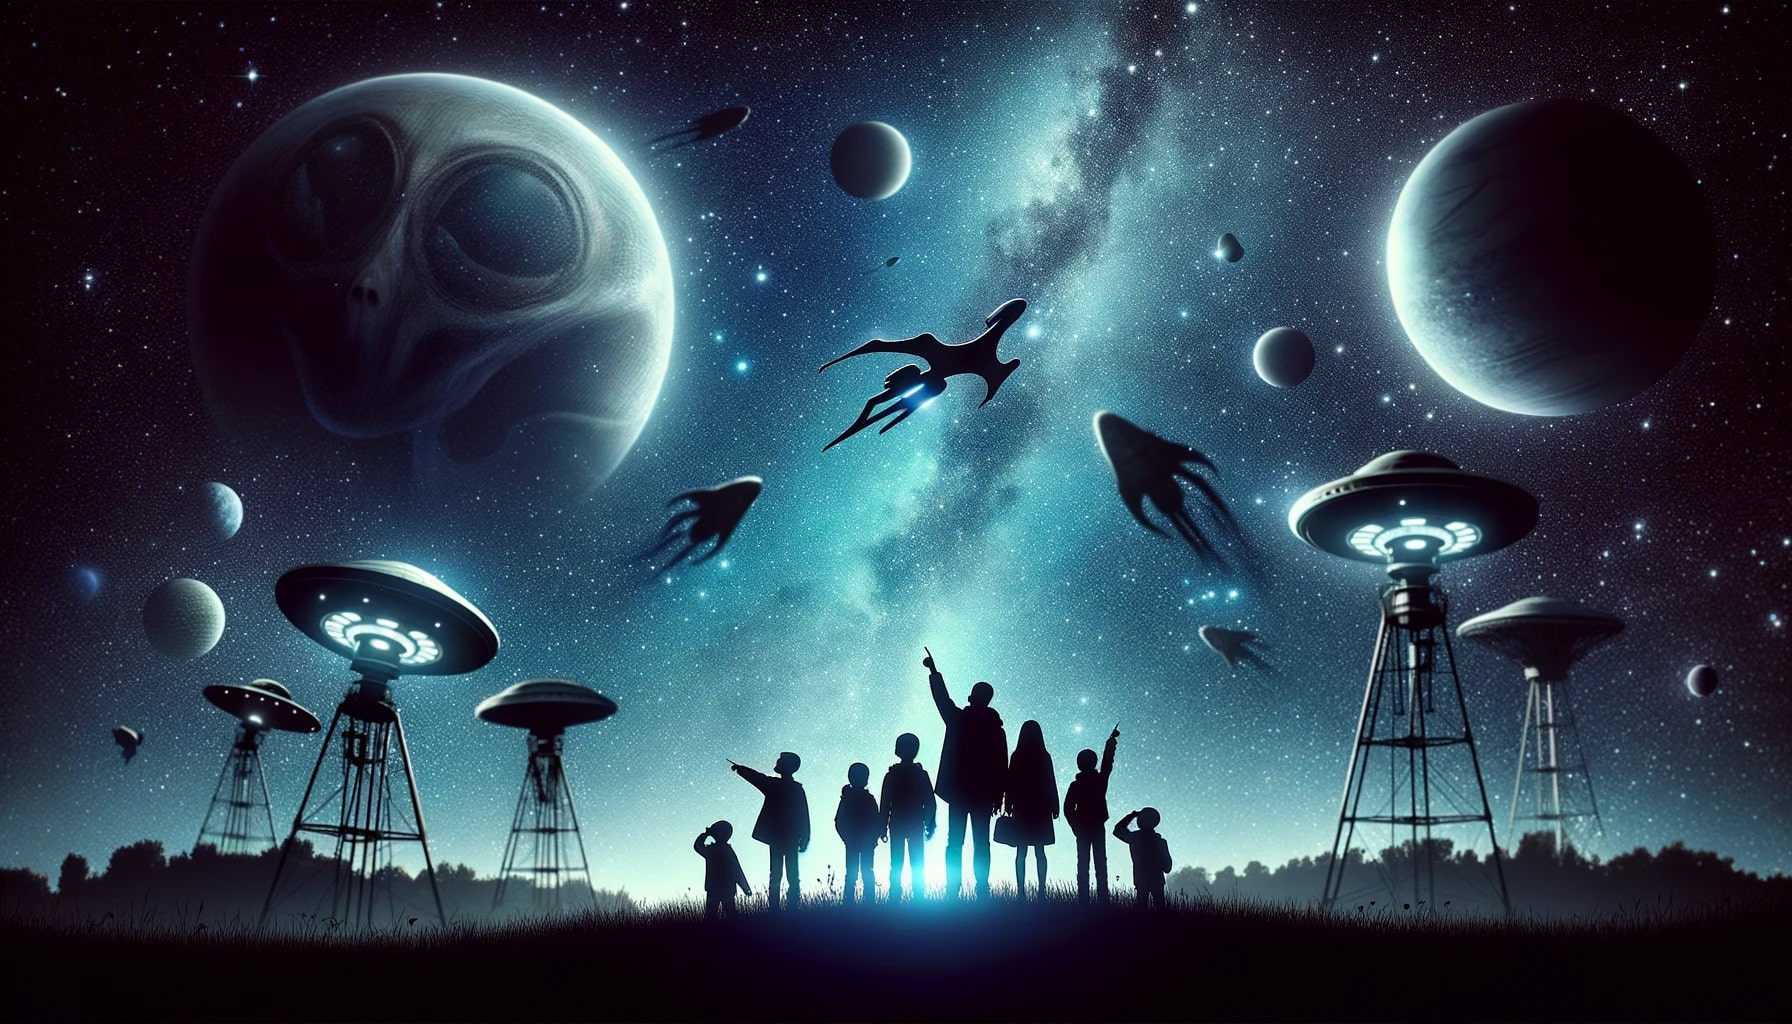 Image of a curious family stargazing, with silhouettes of potential alien civilizations in the sky, symbolizing the eternal human quest for knowledge about the universe.